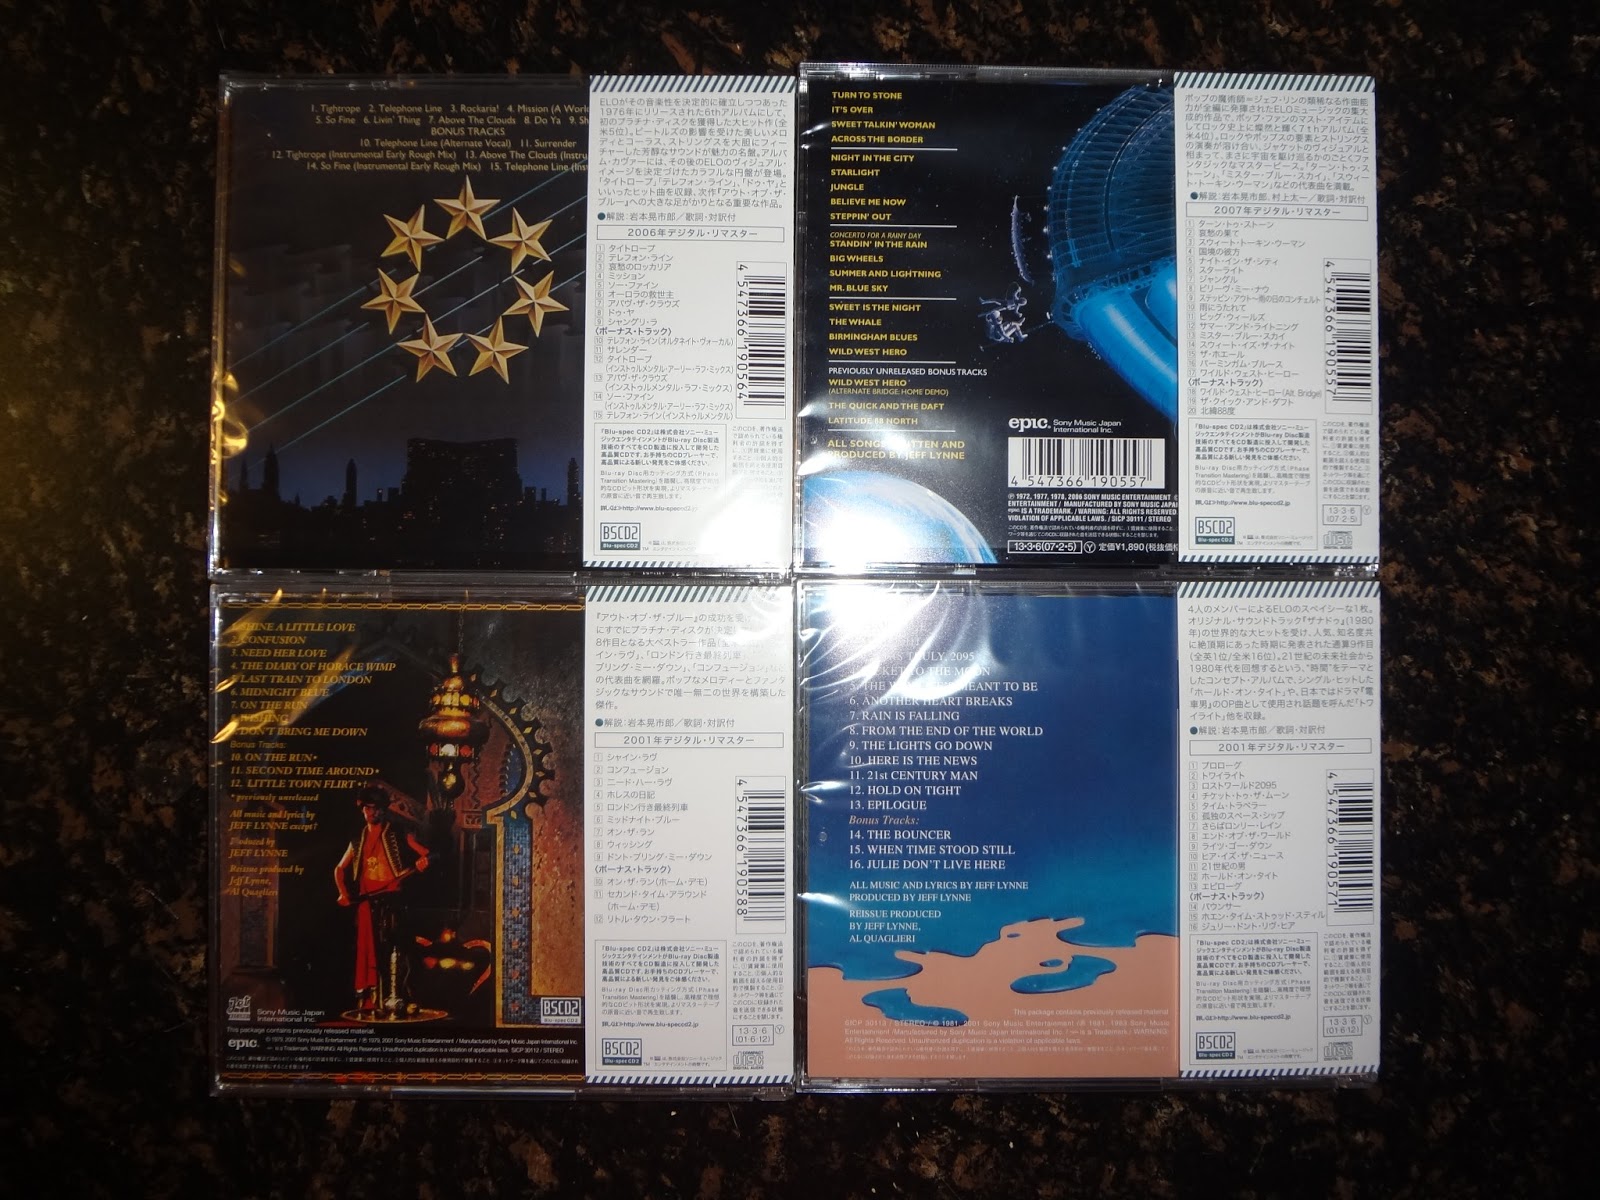 A JEFF LYNNE AND RELATED BLOG: FIRST LOOK: BLU-SPEC CD 2